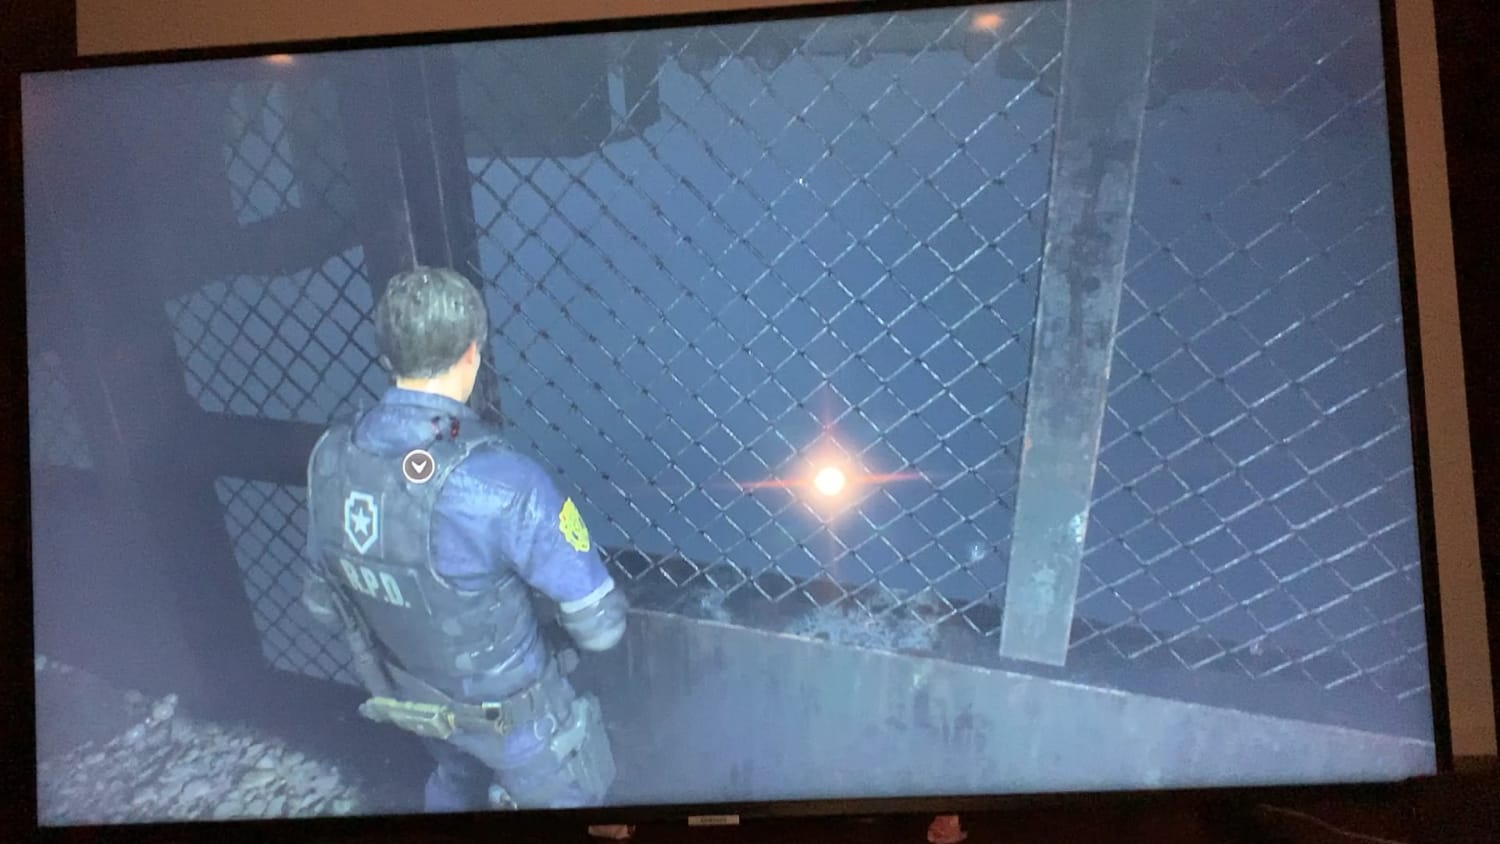 [Resident Evil 2 Remake] Oh god, Leon, the zombies have become paranormal!